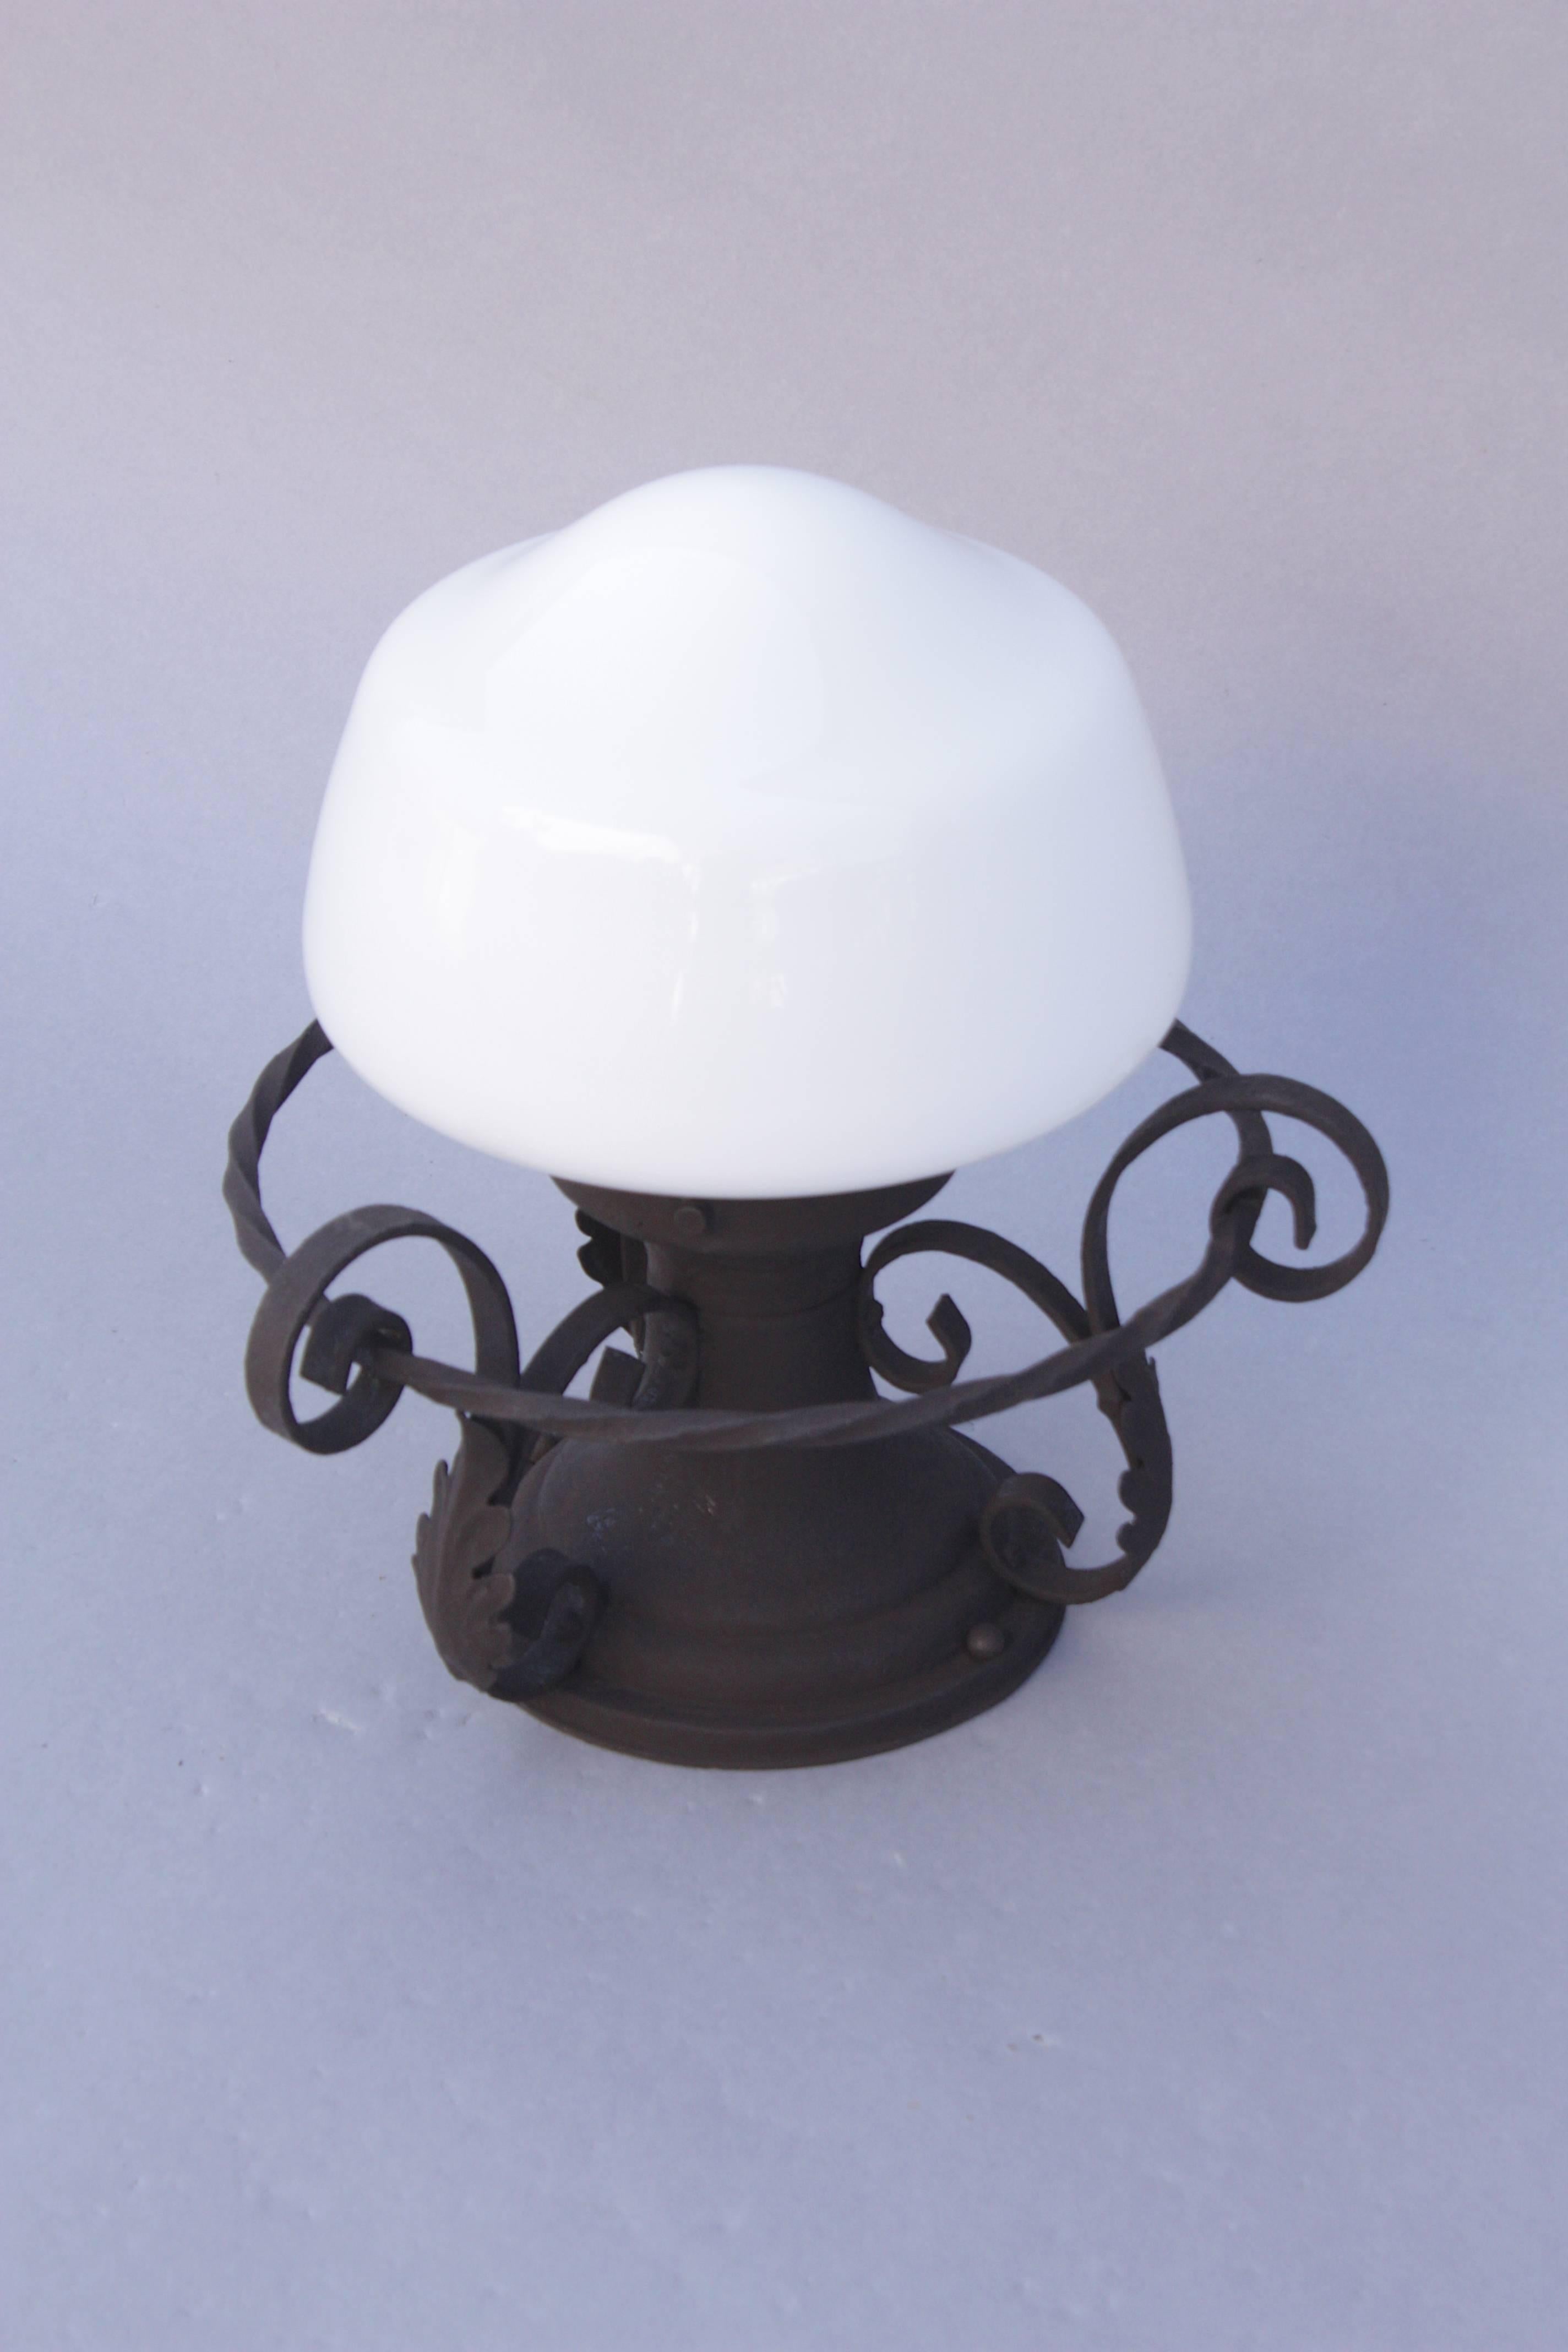 Spanish Revival ceiling mount fixture with acanthus leaf motif and milk glass globe.